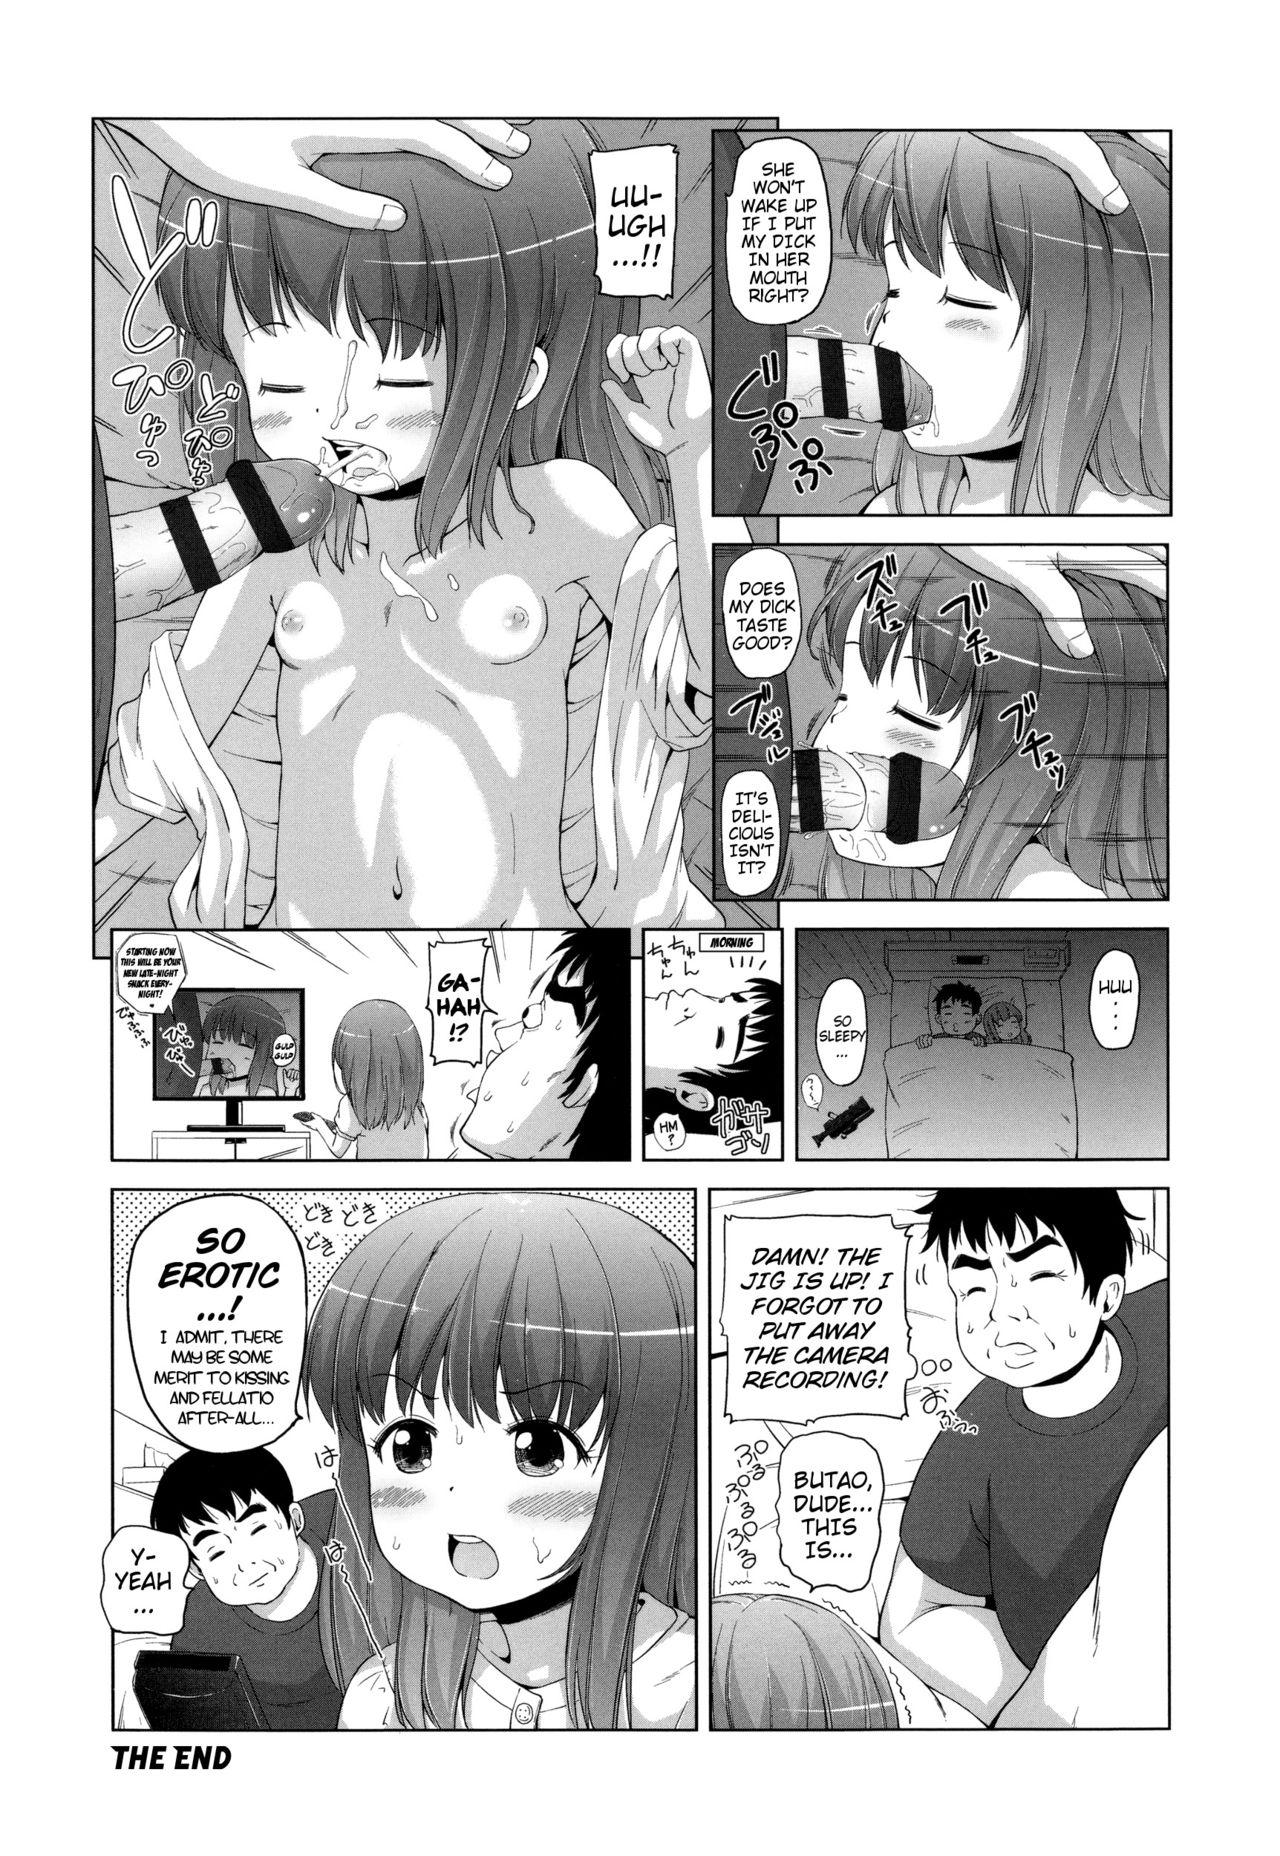 Chile [Himeno Mikan] Ganbare Aoi-chan!! | Hang In There Aoi-chan!! (Marshmallow Lolita) [English] {Mistvern} Lesbos - Page 34